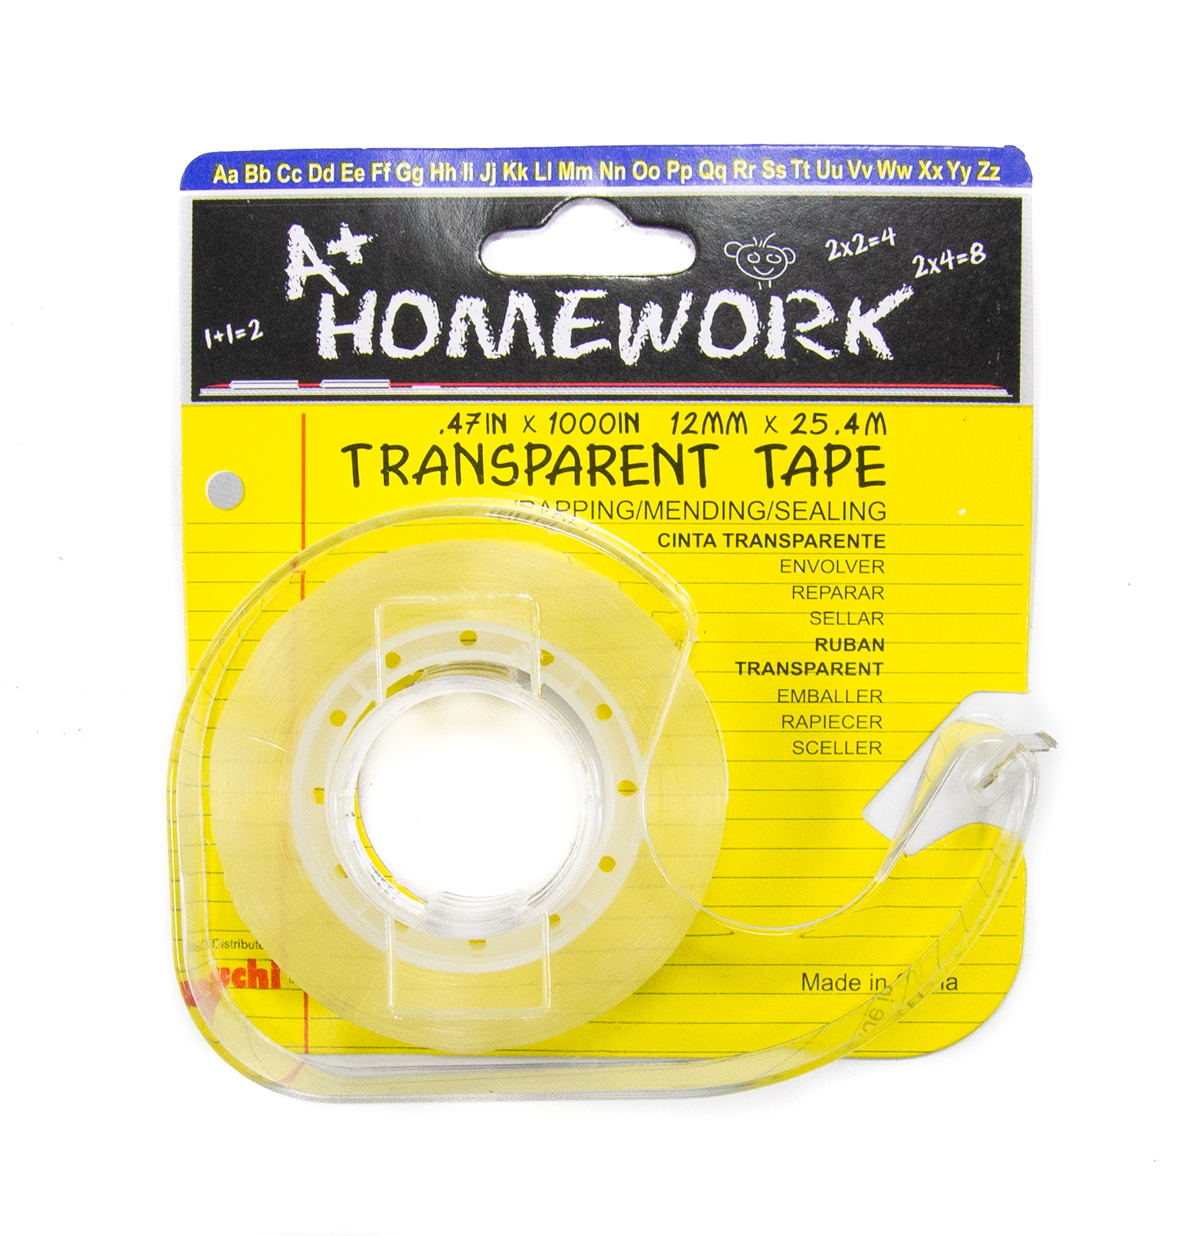 Wholesale Clear Stationery Tape - 1 / 2